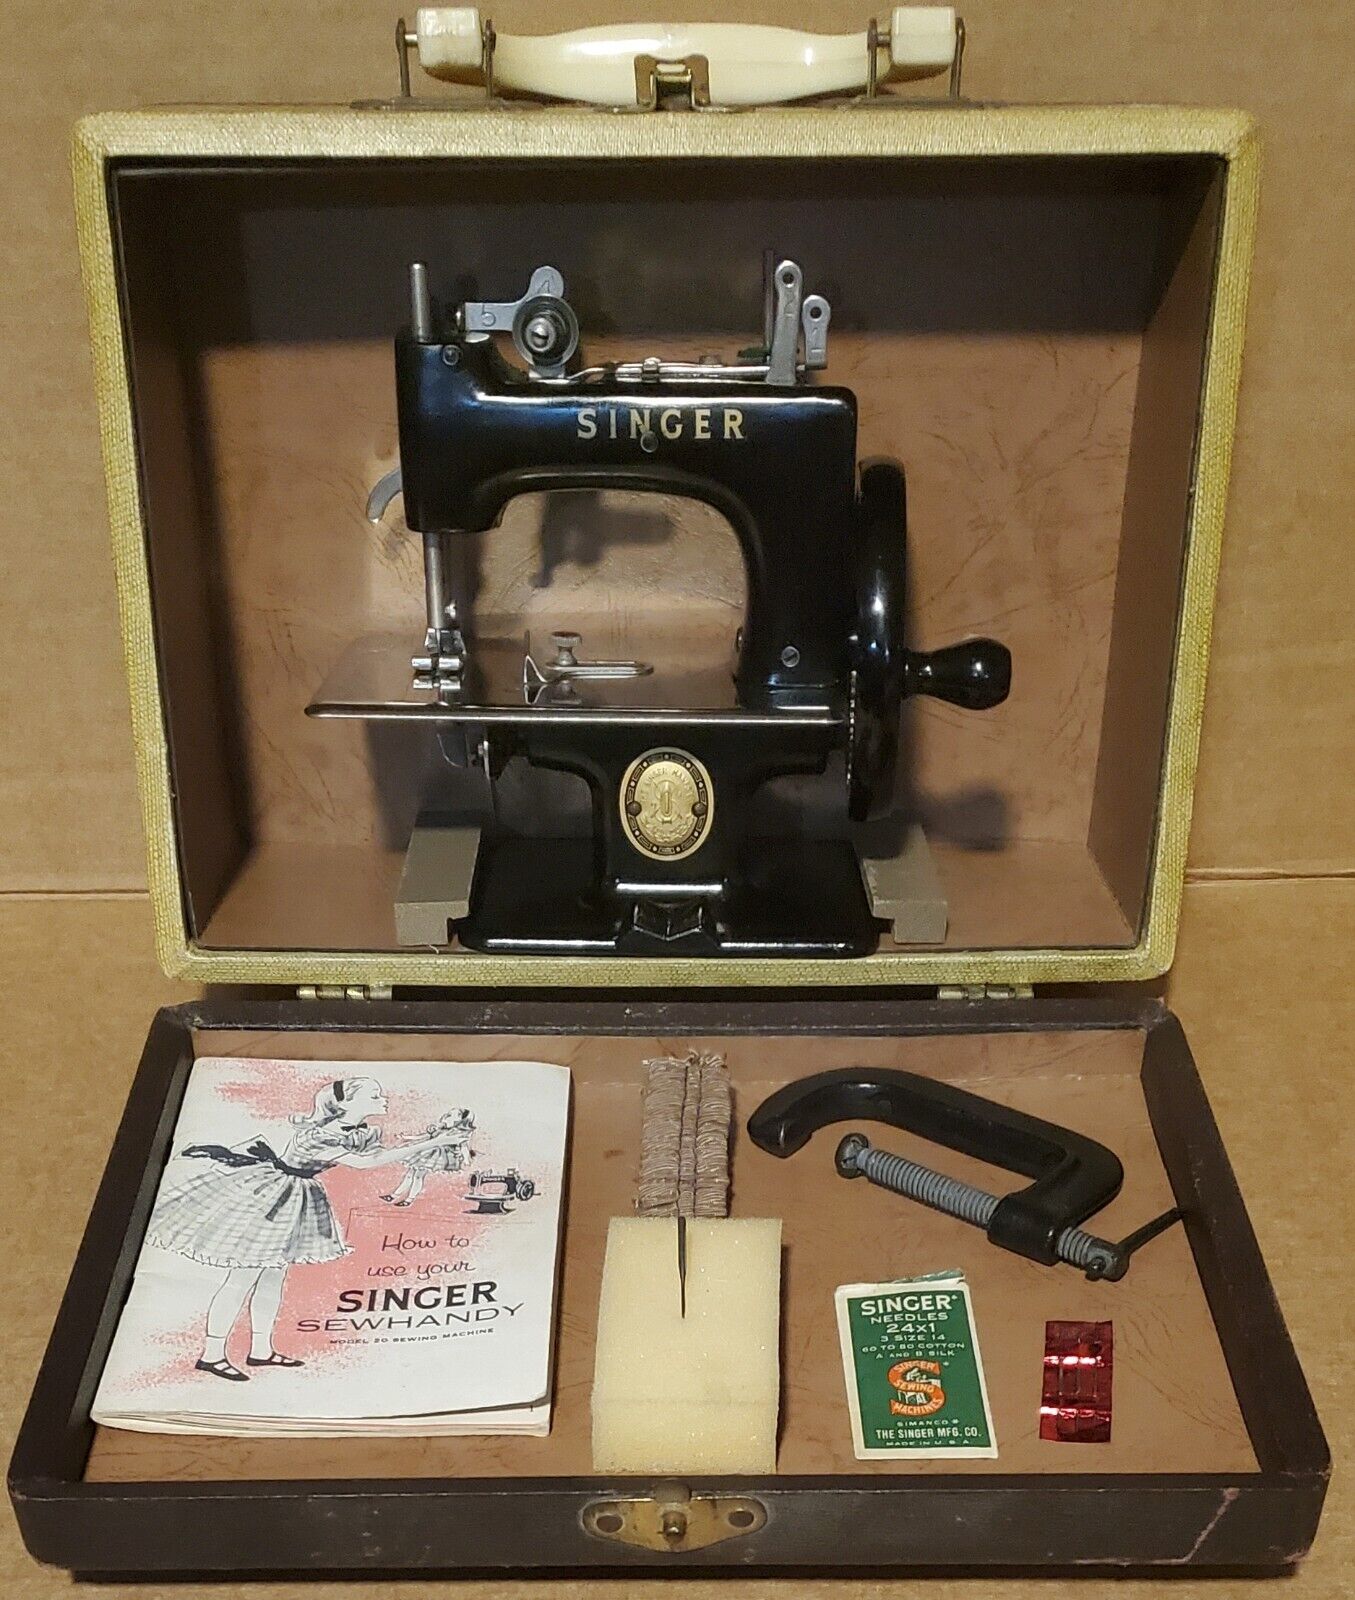 Vintage Singer Sewhandy Child\'s Sewing Machine in original case with manual